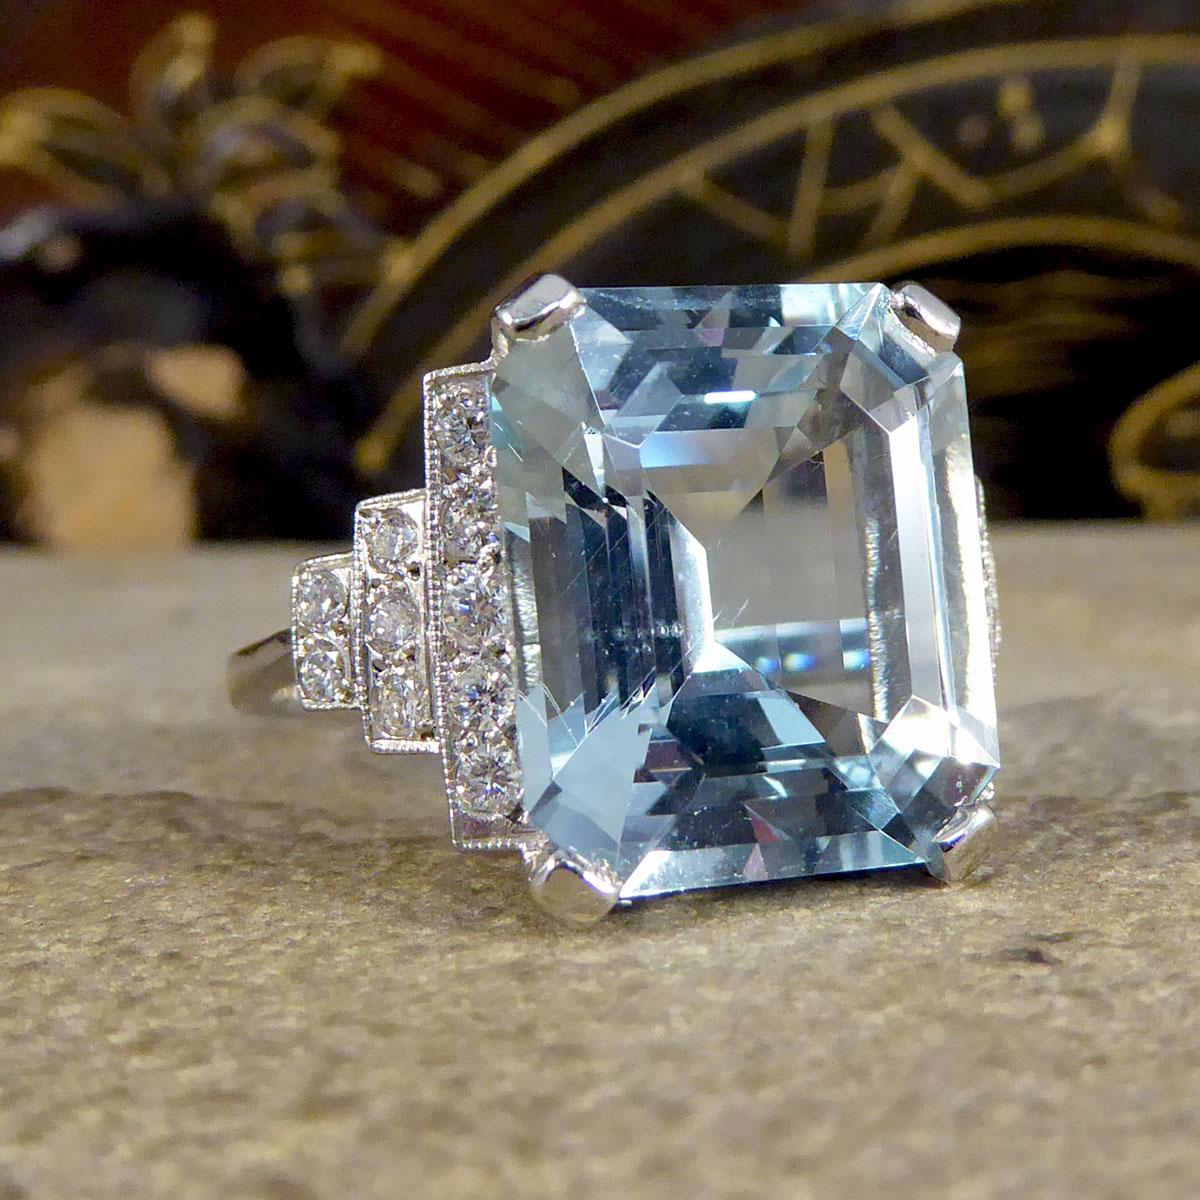 This absolutely stunning ring features a mesmerising 9.00ct bright and beautiful Emerald Cut Aquamarine. On either shoulder sit a horizontal pyramid of brilliant cut Diamonds, closest to the Aqua are five stone, down to three then two Diamonds